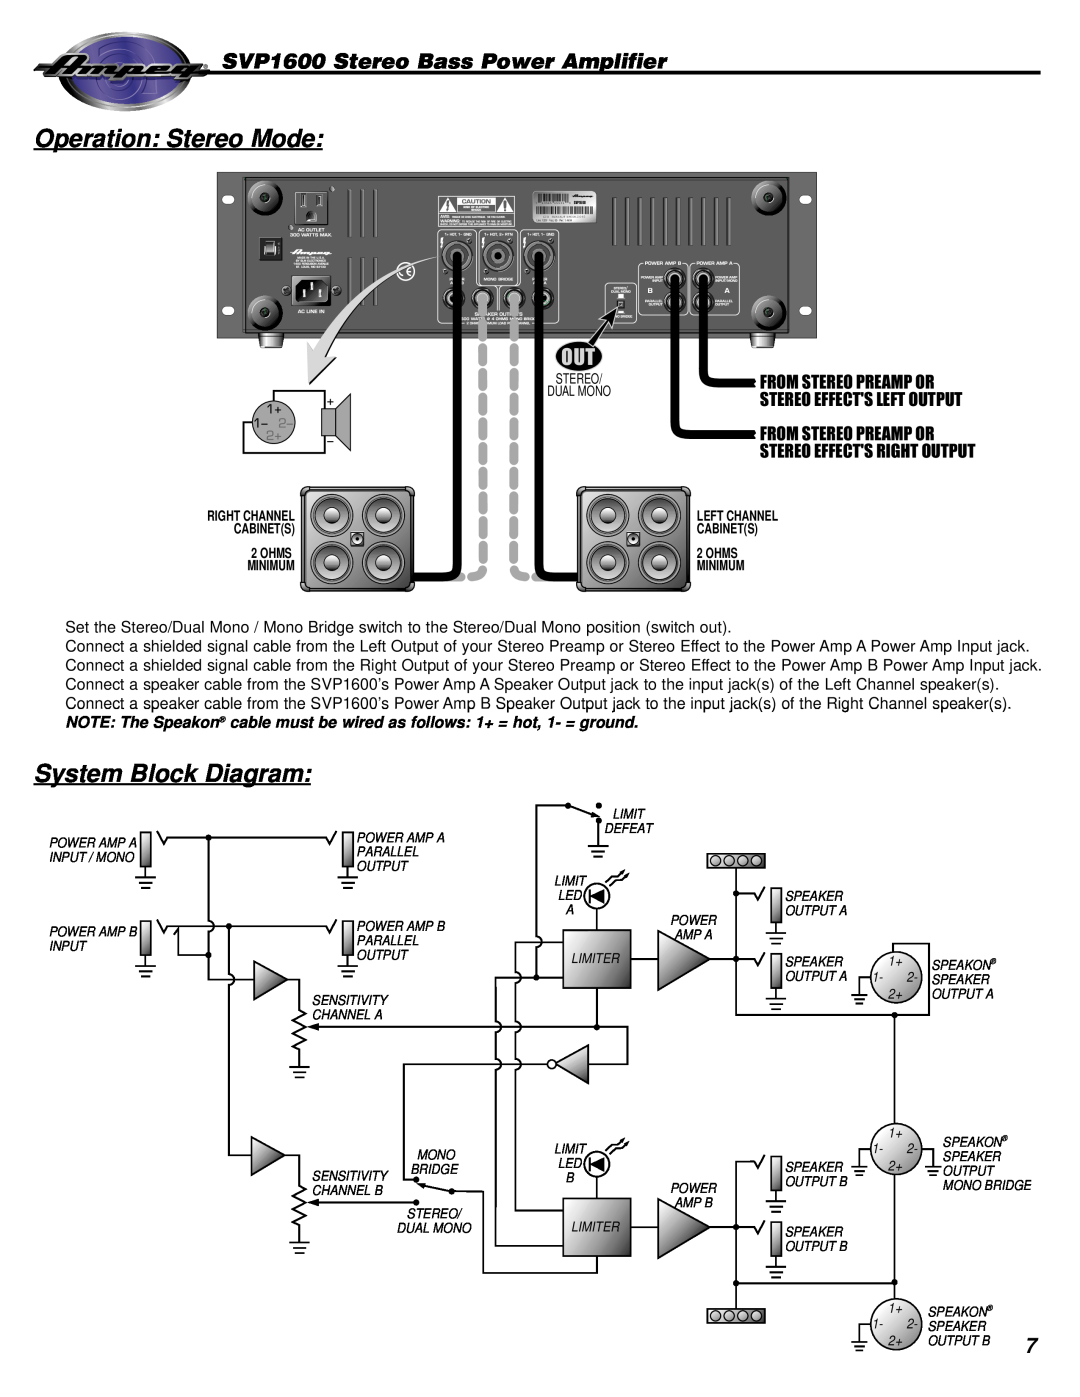 Ampeg manual Operation Stereo Mode, System Block Diagram, SVP1600 Stereo Bass Power Amplifier, From Stereo Preamp Or 